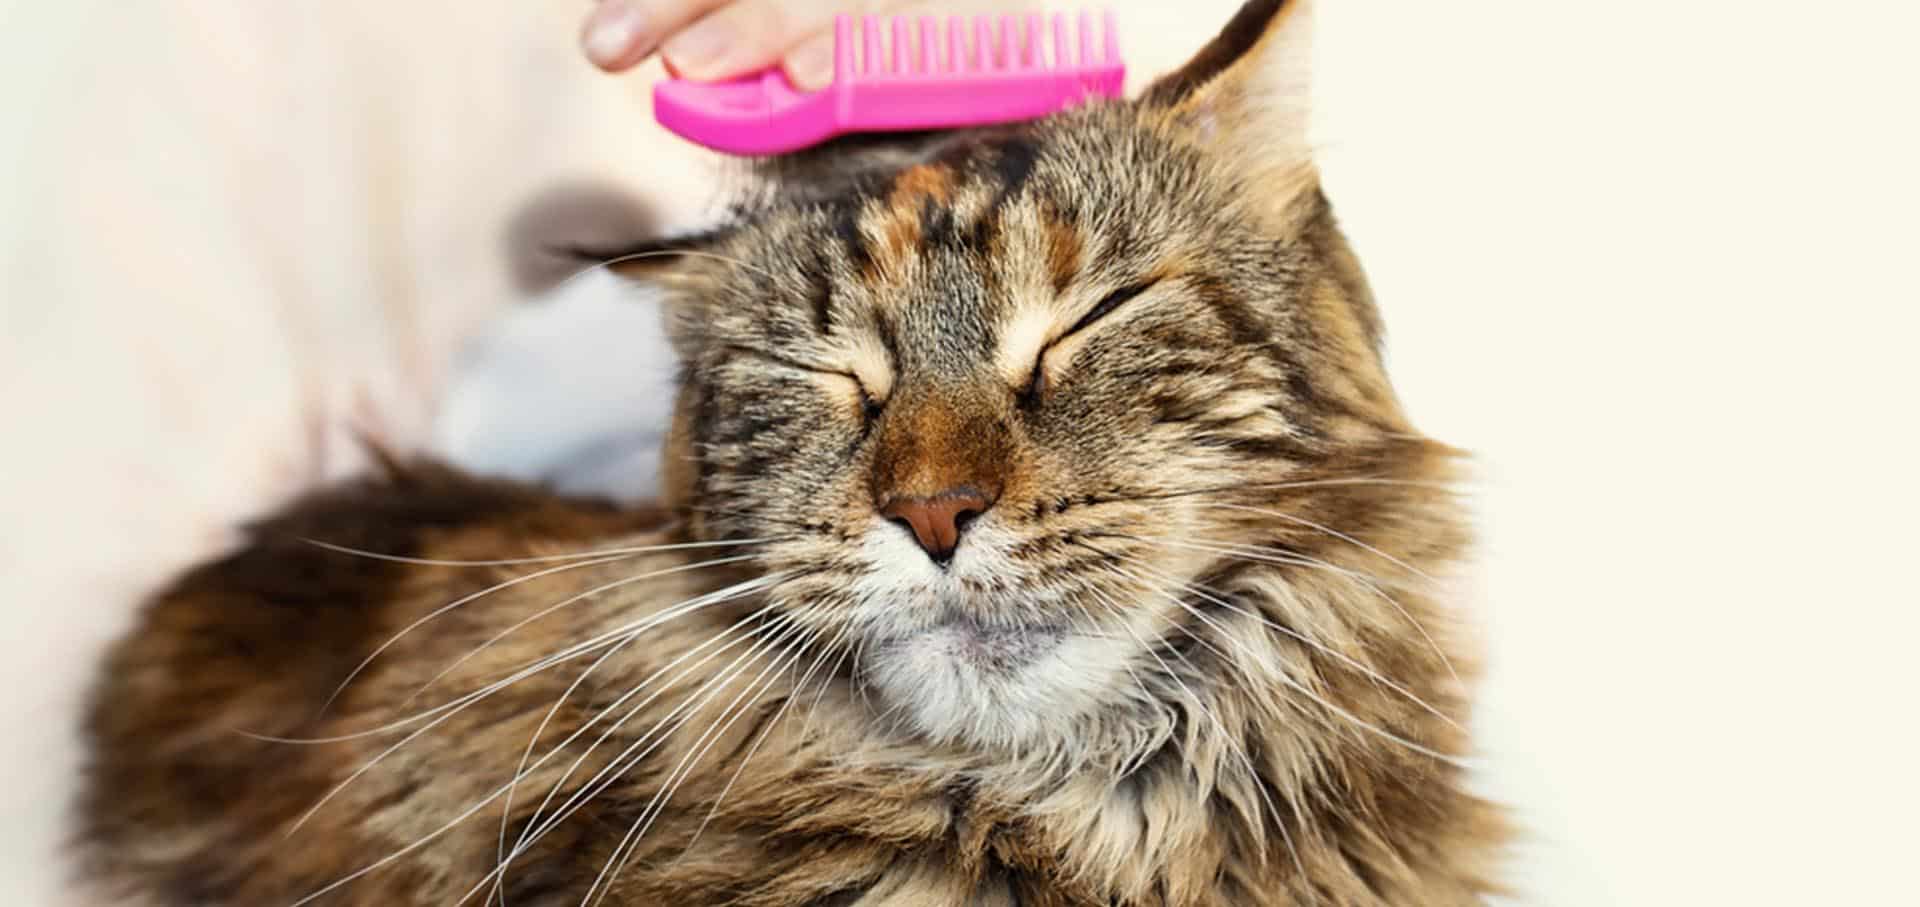 Cat being brushed with a pink hairbrush — Best Veterinary Services in Bundaberg, QLD